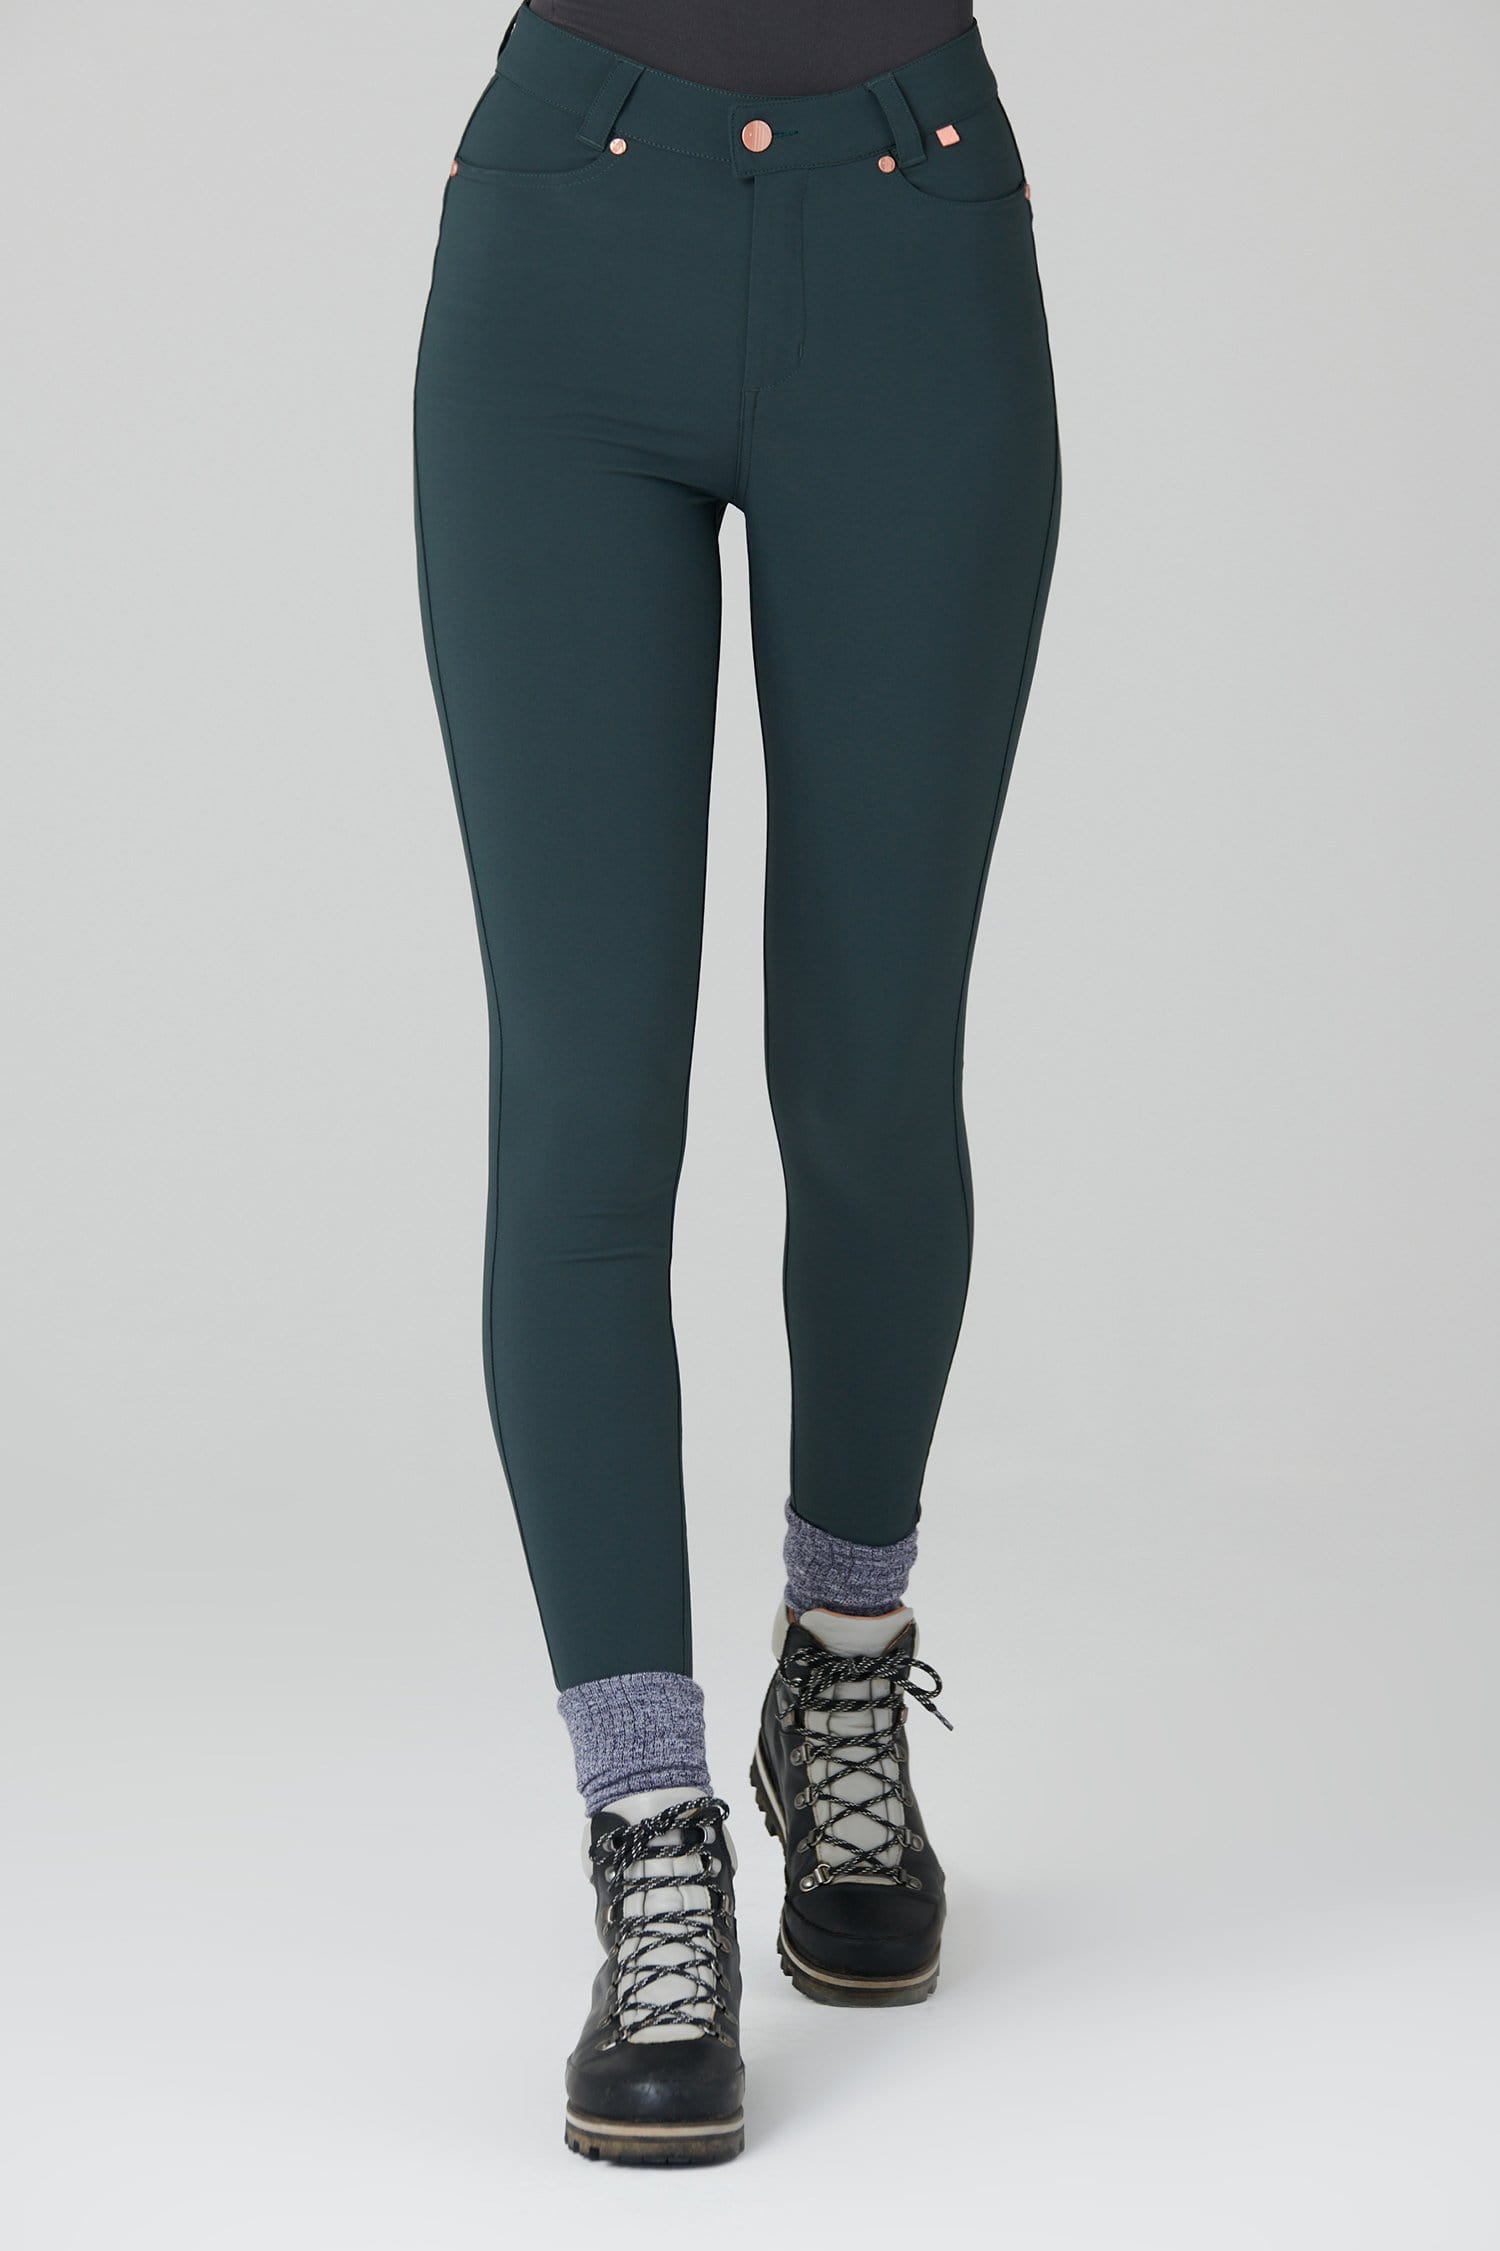 Thermal Skinny Outdoor Trousers - Forest Green - 28l / Uk10 - Womens - Acai Outdoorwear